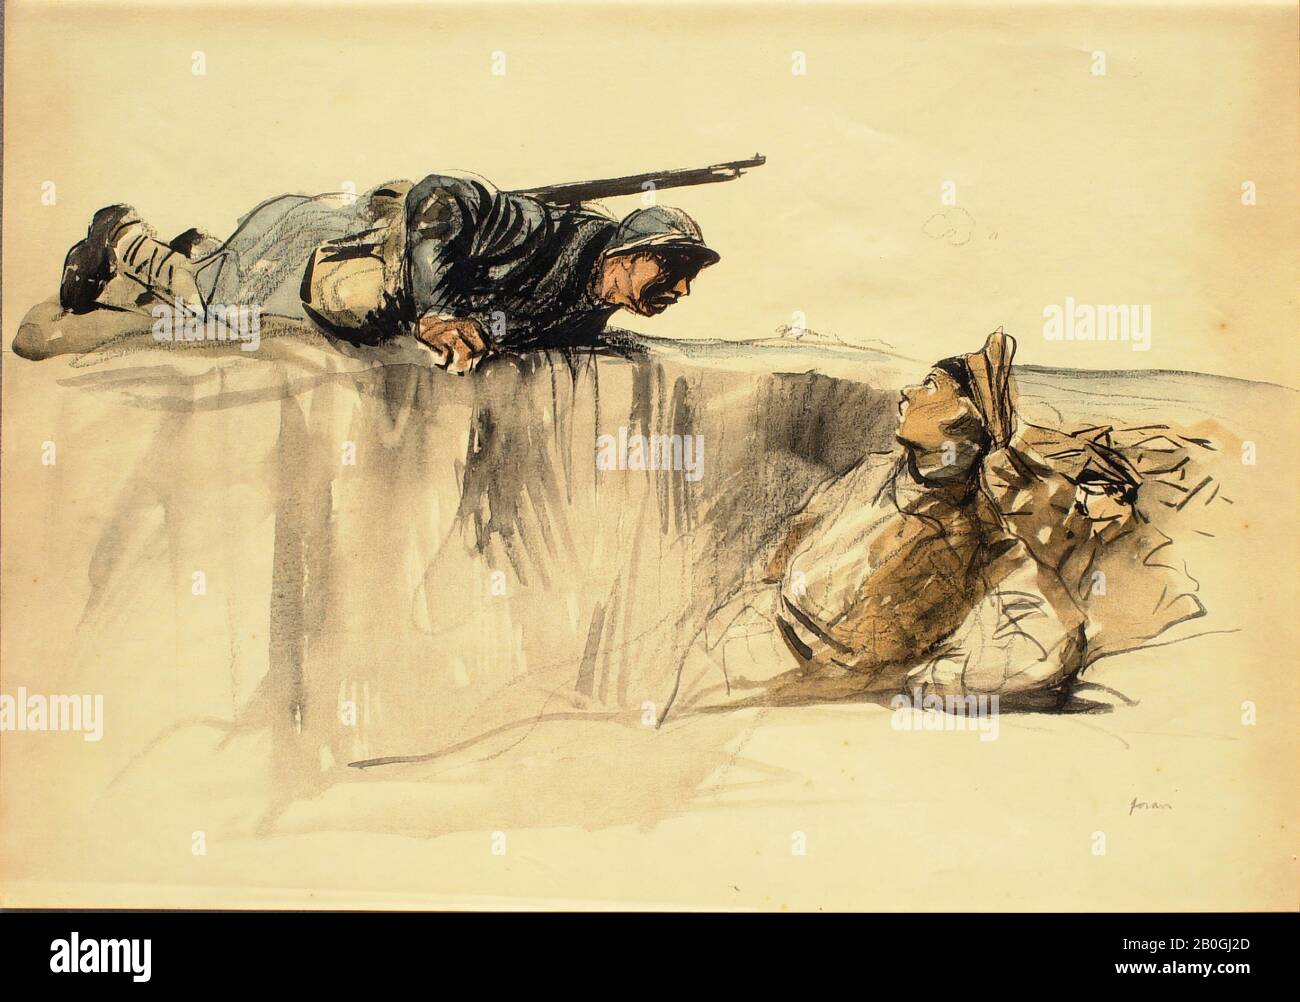 After Jean Louis Forain, French, 1852–1931, Untitled Drawings of World War I: Allied Soldier Confronting German Officer in Trench, 1862–1931, Léon Marotte process facsimile reproduction on paper, after crayon and wash drawing by Forain, sheet: 12 1/8 x 17 1/4 in. (30.8 x 43.8 cm Stock Photo